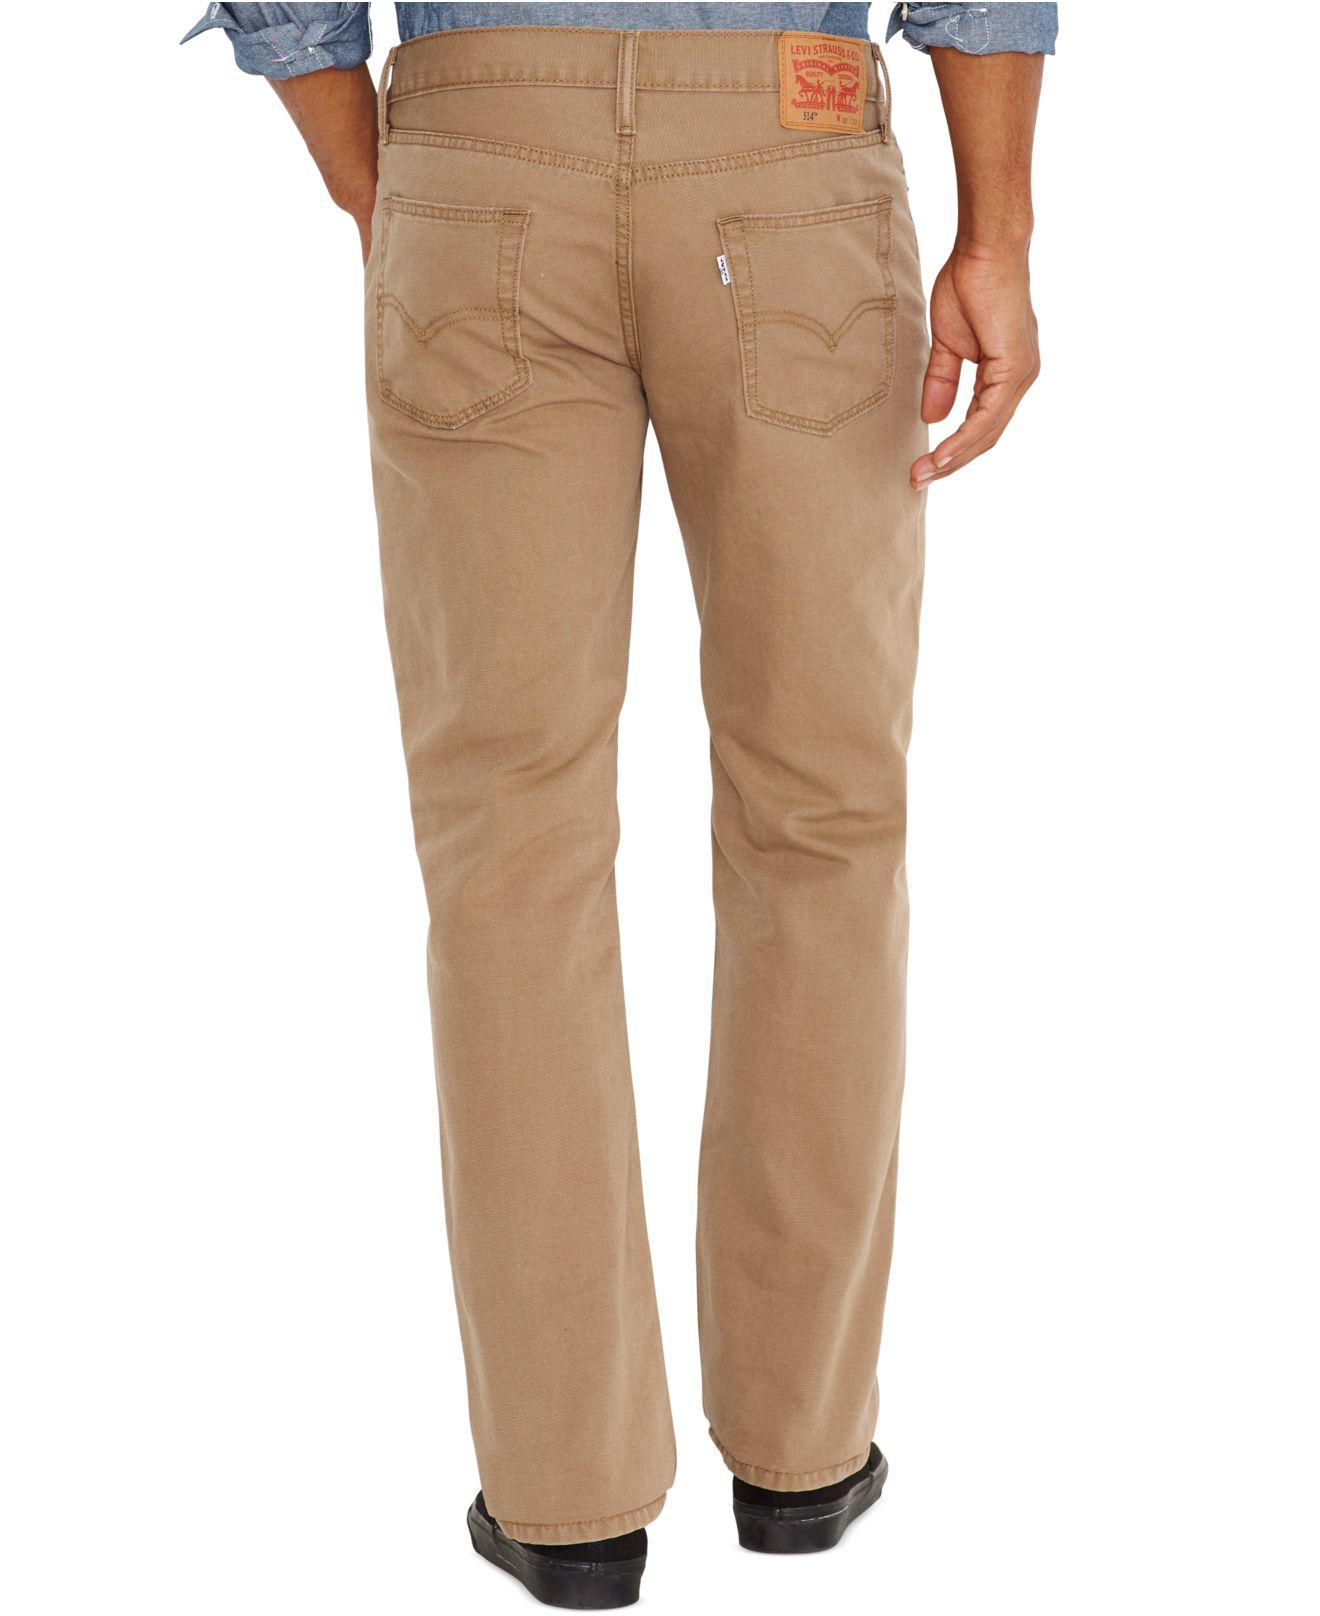 Levi's 514 Straight Fit Padox Canvas Twill Pants in Natural for Men - Lyst